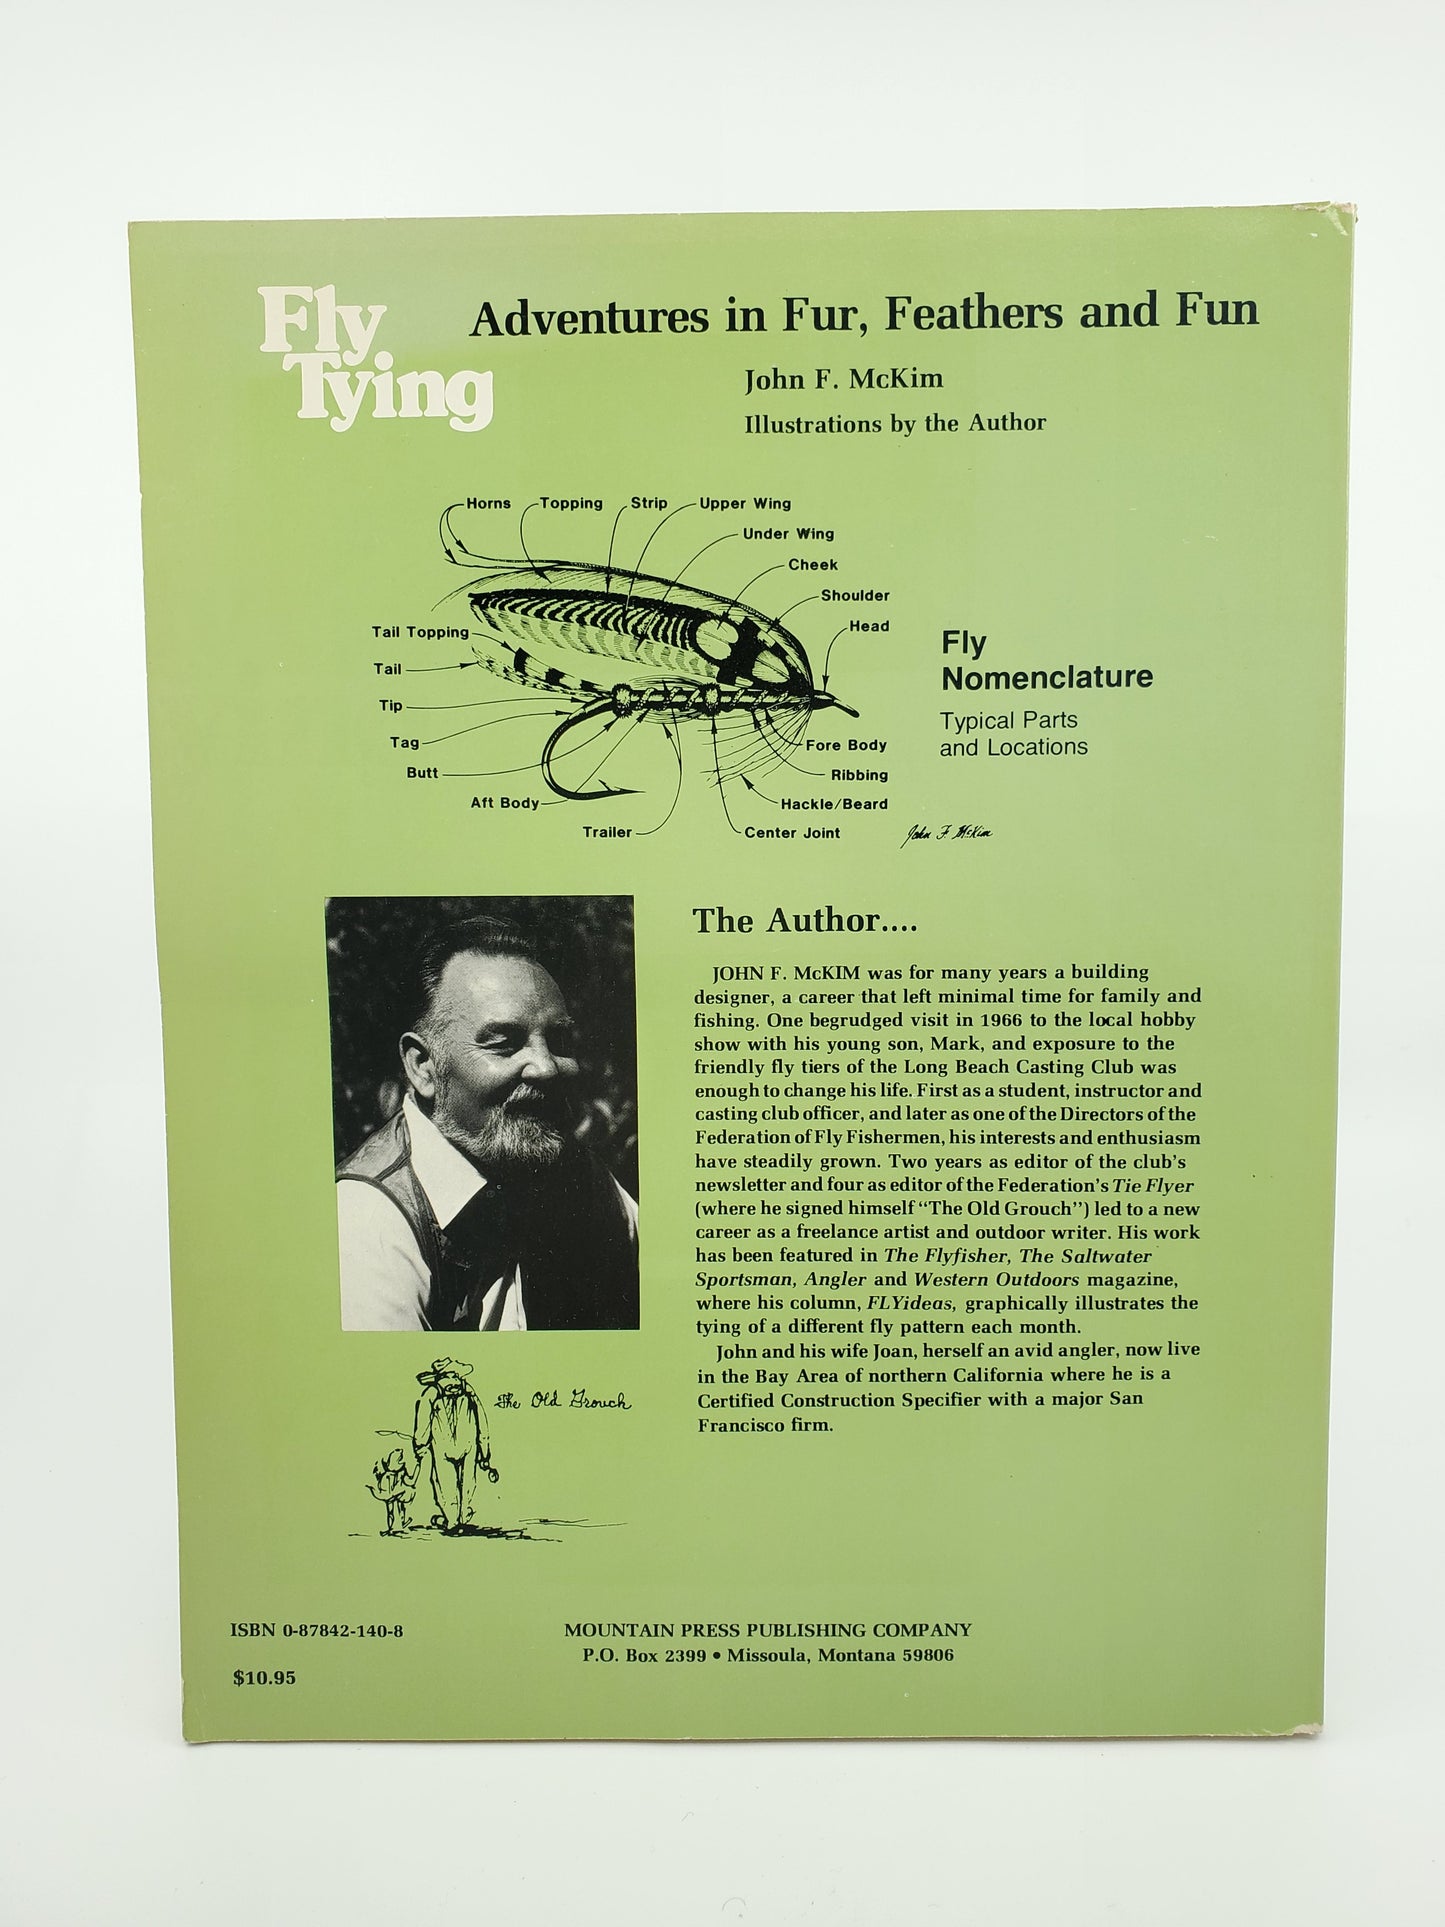 Fly-Tying: Adventures in Fur, Feathers and Fun